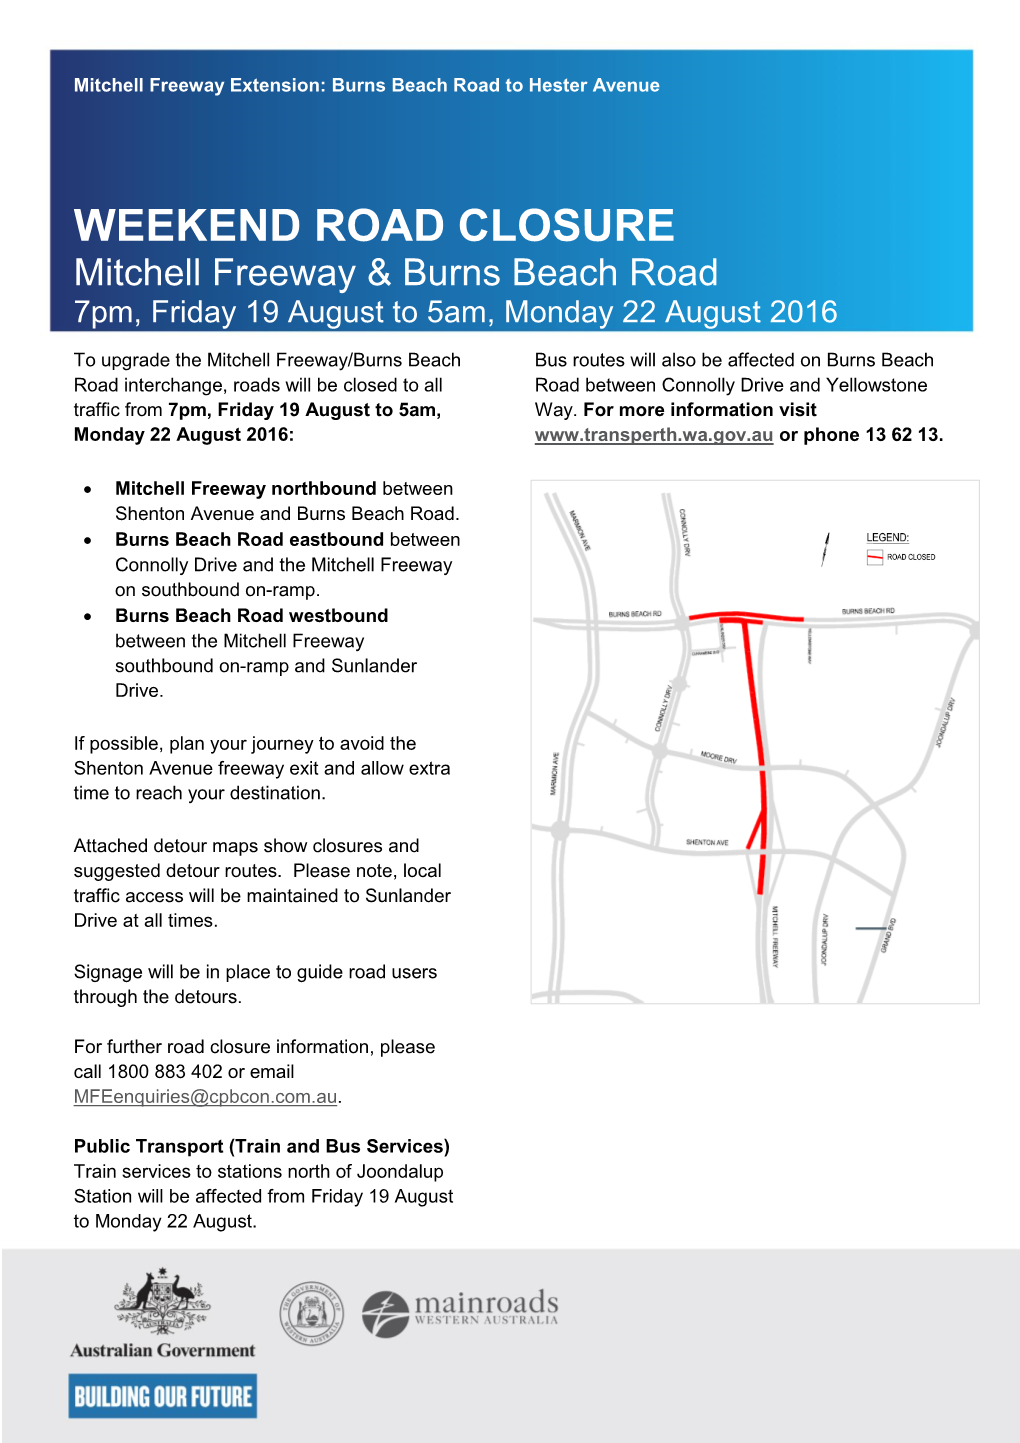 WEEKEND ROAD CLOSURE Mitchell Freeway & Burns Beach Road 7Pm, Friday 19 August to 5Am, Monday 22 August 2016